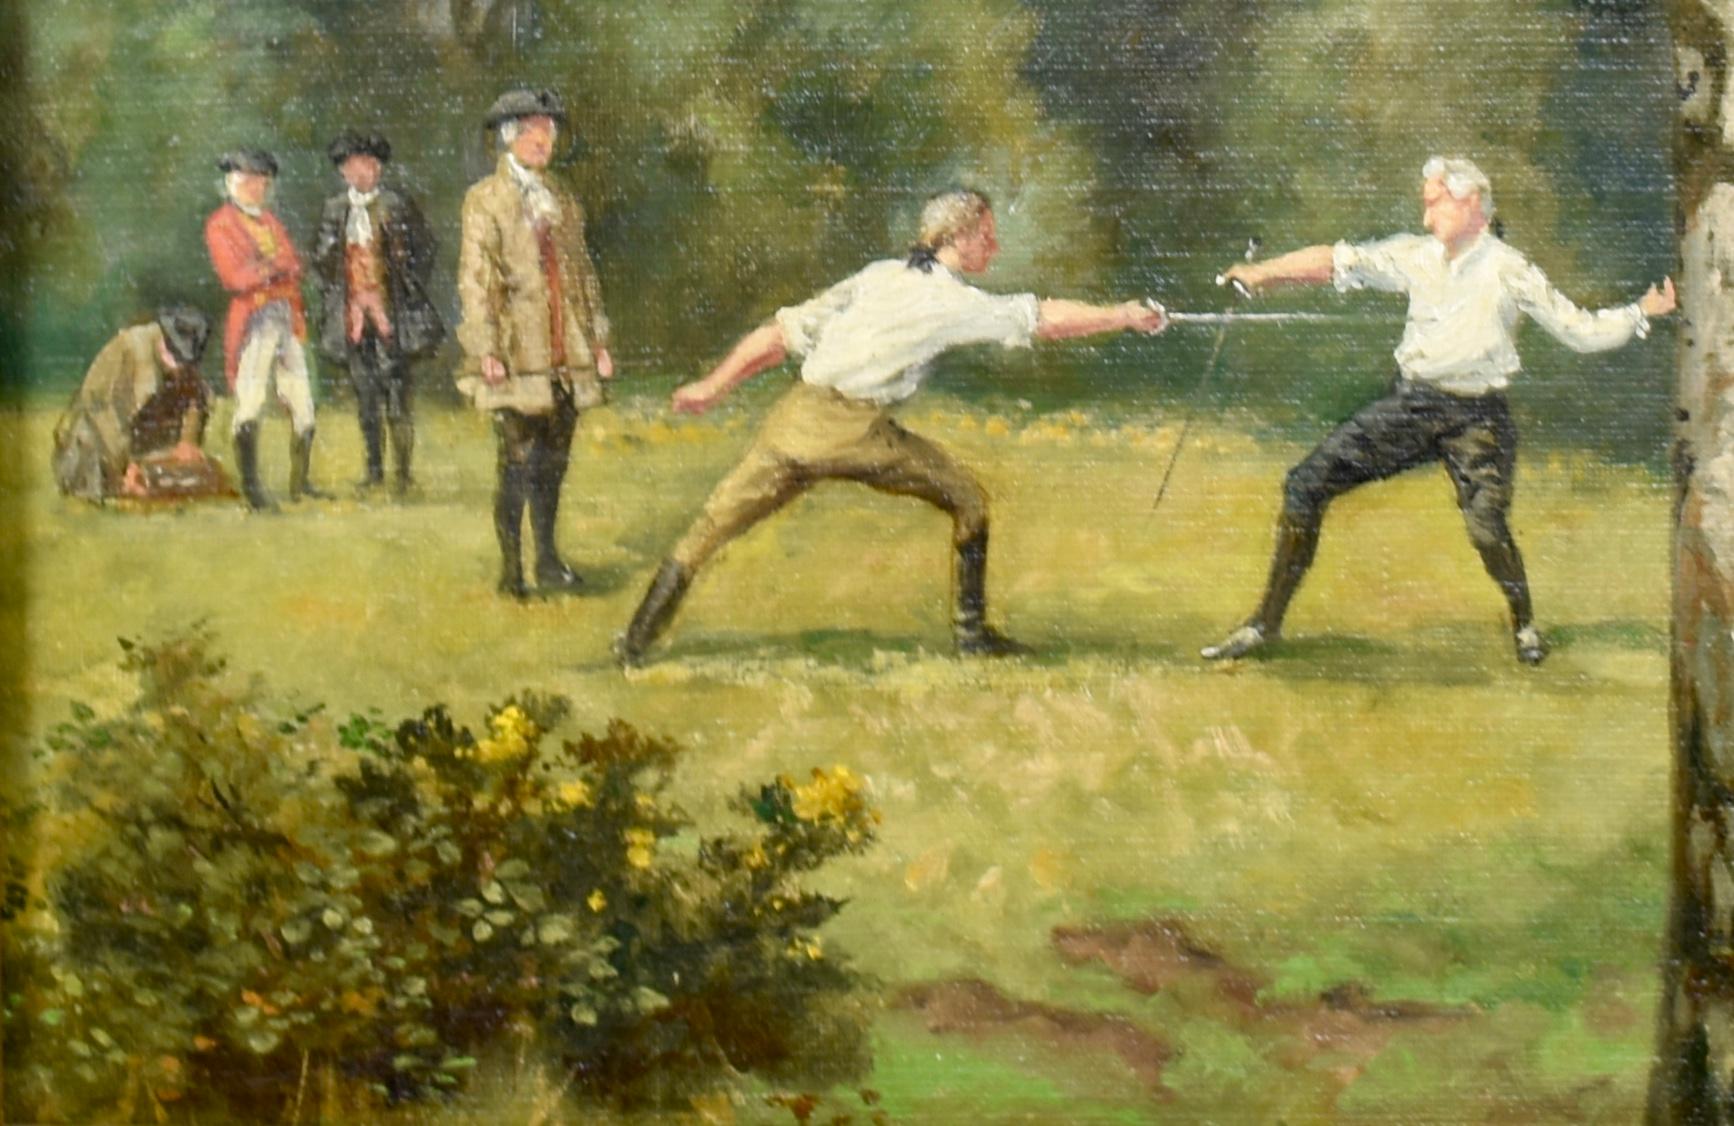 Antique English Sporting Art, Fencing in the Woods, Original Rare Oil Painting 1